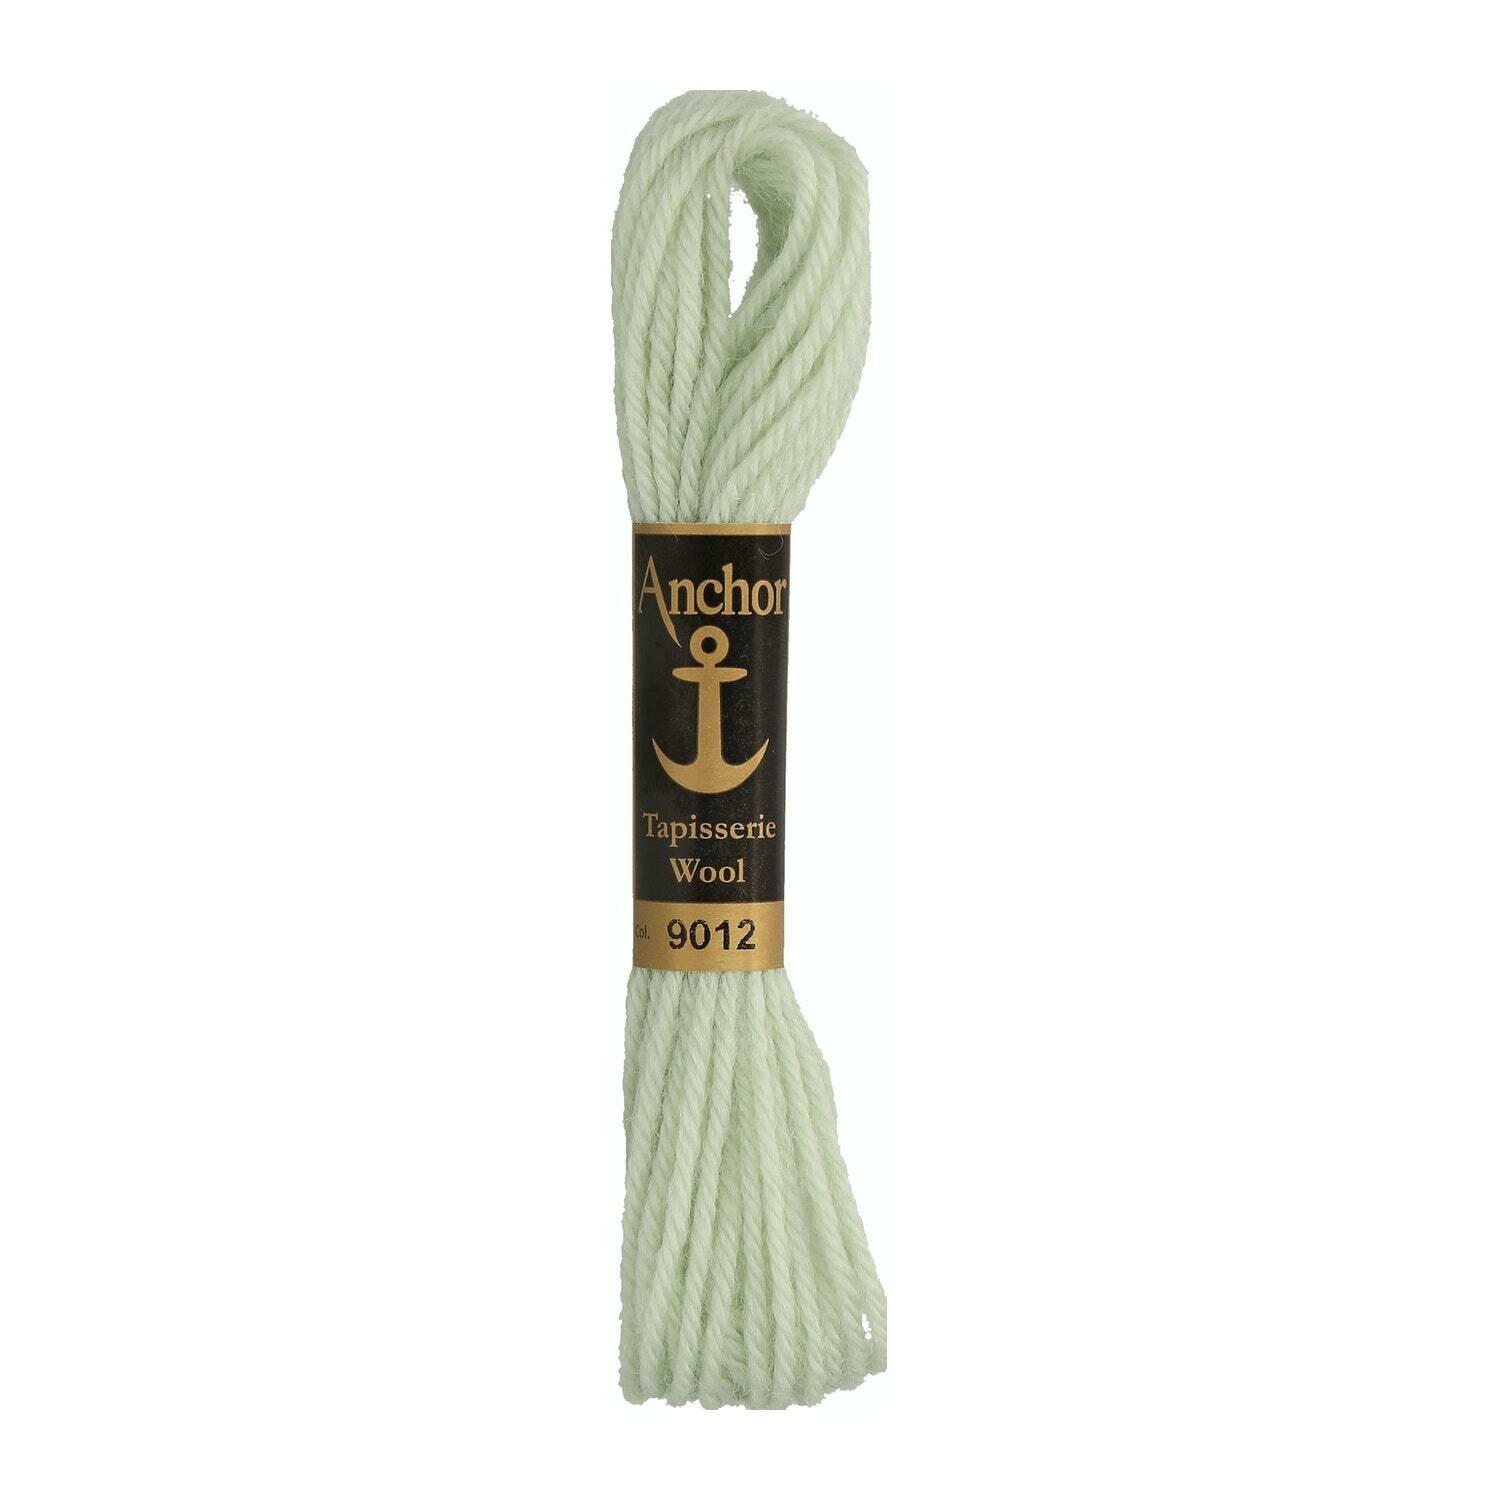 Anchor Tapisserie Wool # 09012